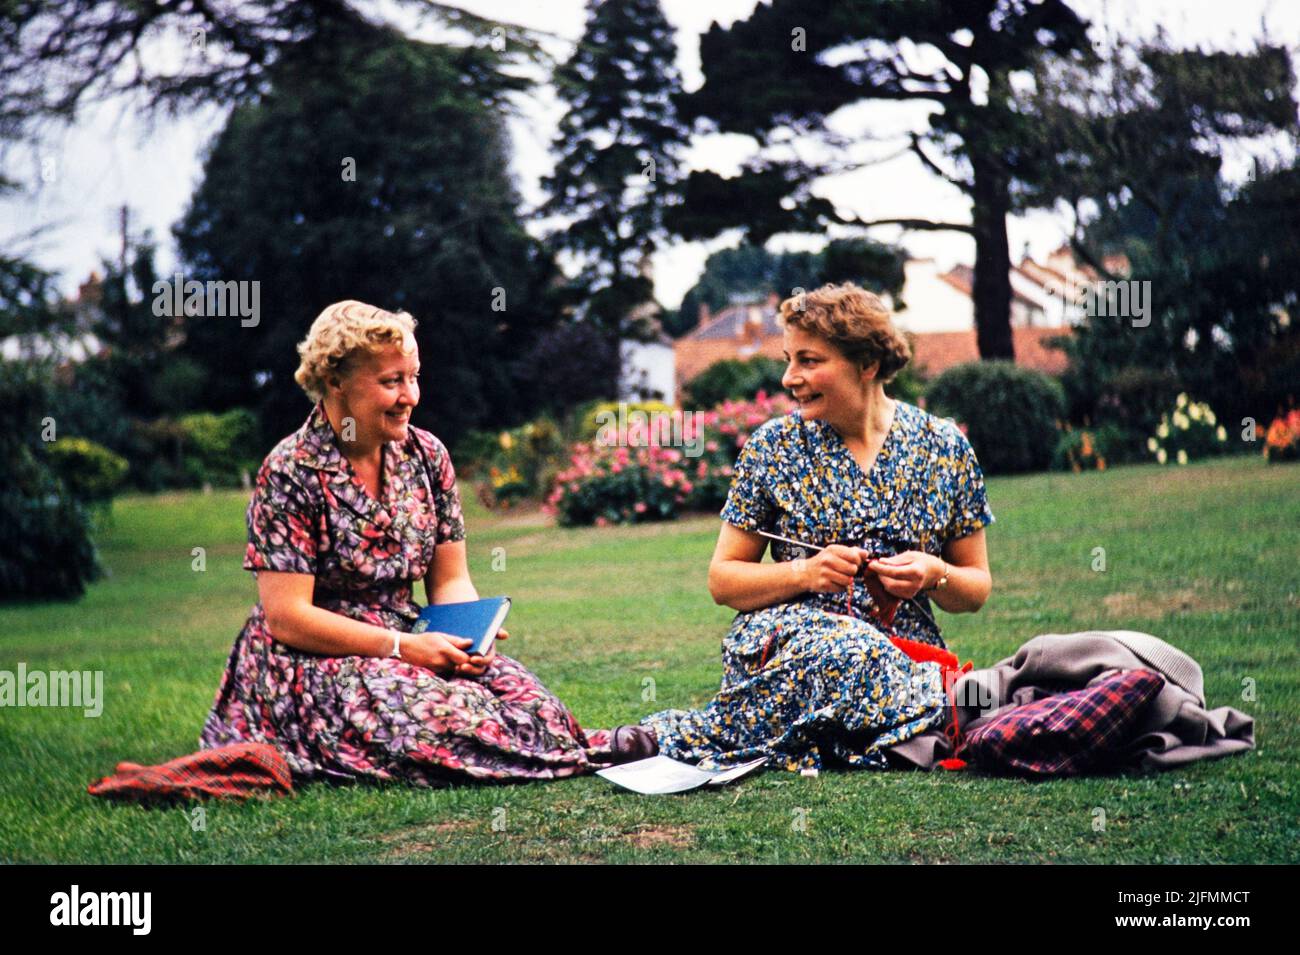 Two women friends sitting on grass lawn one knitting, smiling at each other, Dawlish, Devon, England, UK early 1960s Stock Photo